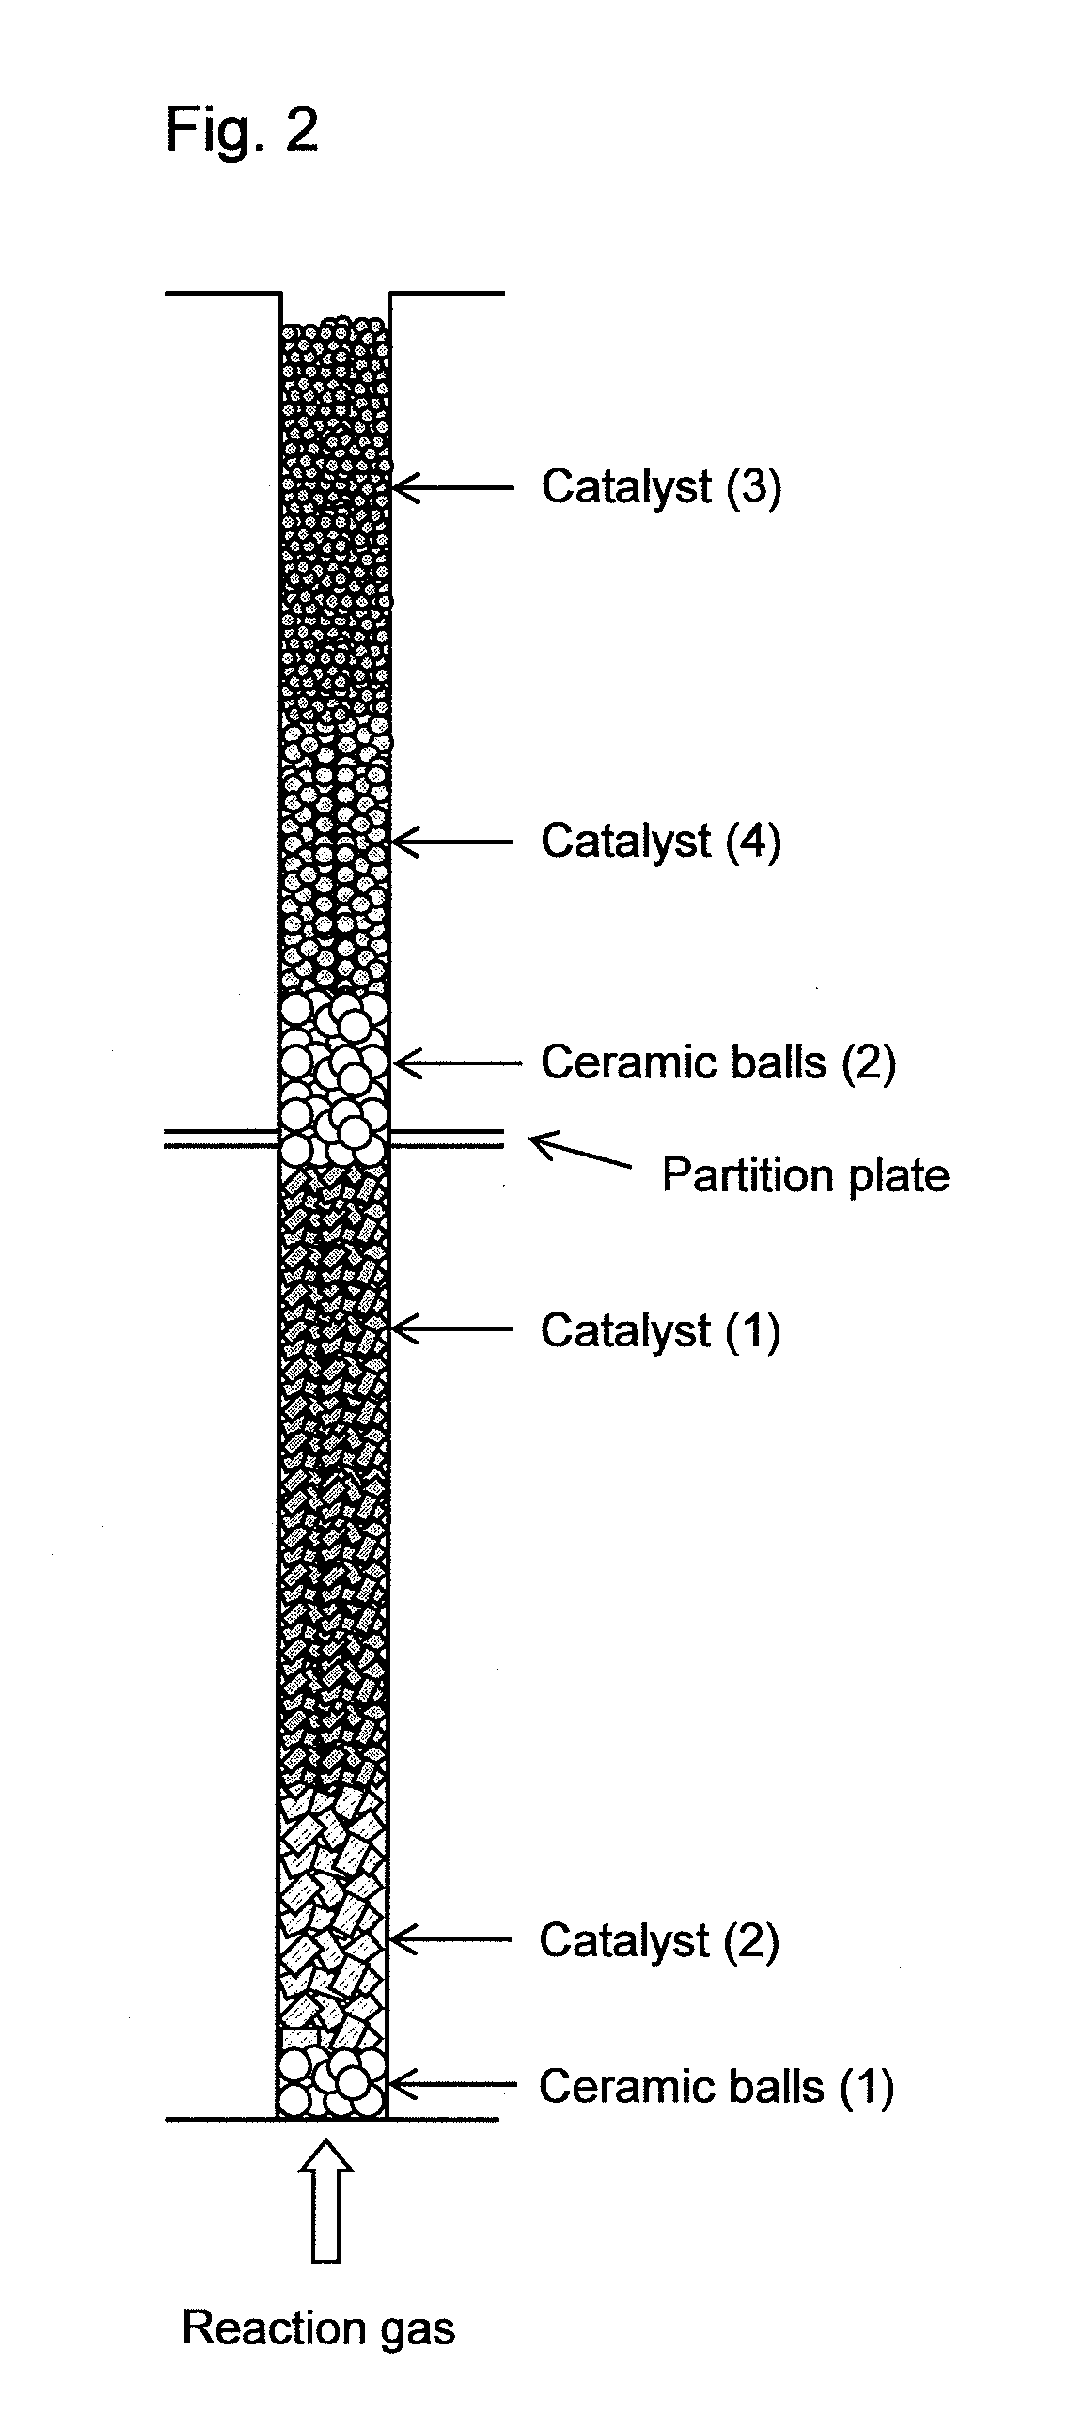 Method of loading solid particles into a fixed-bed multitubular reactor